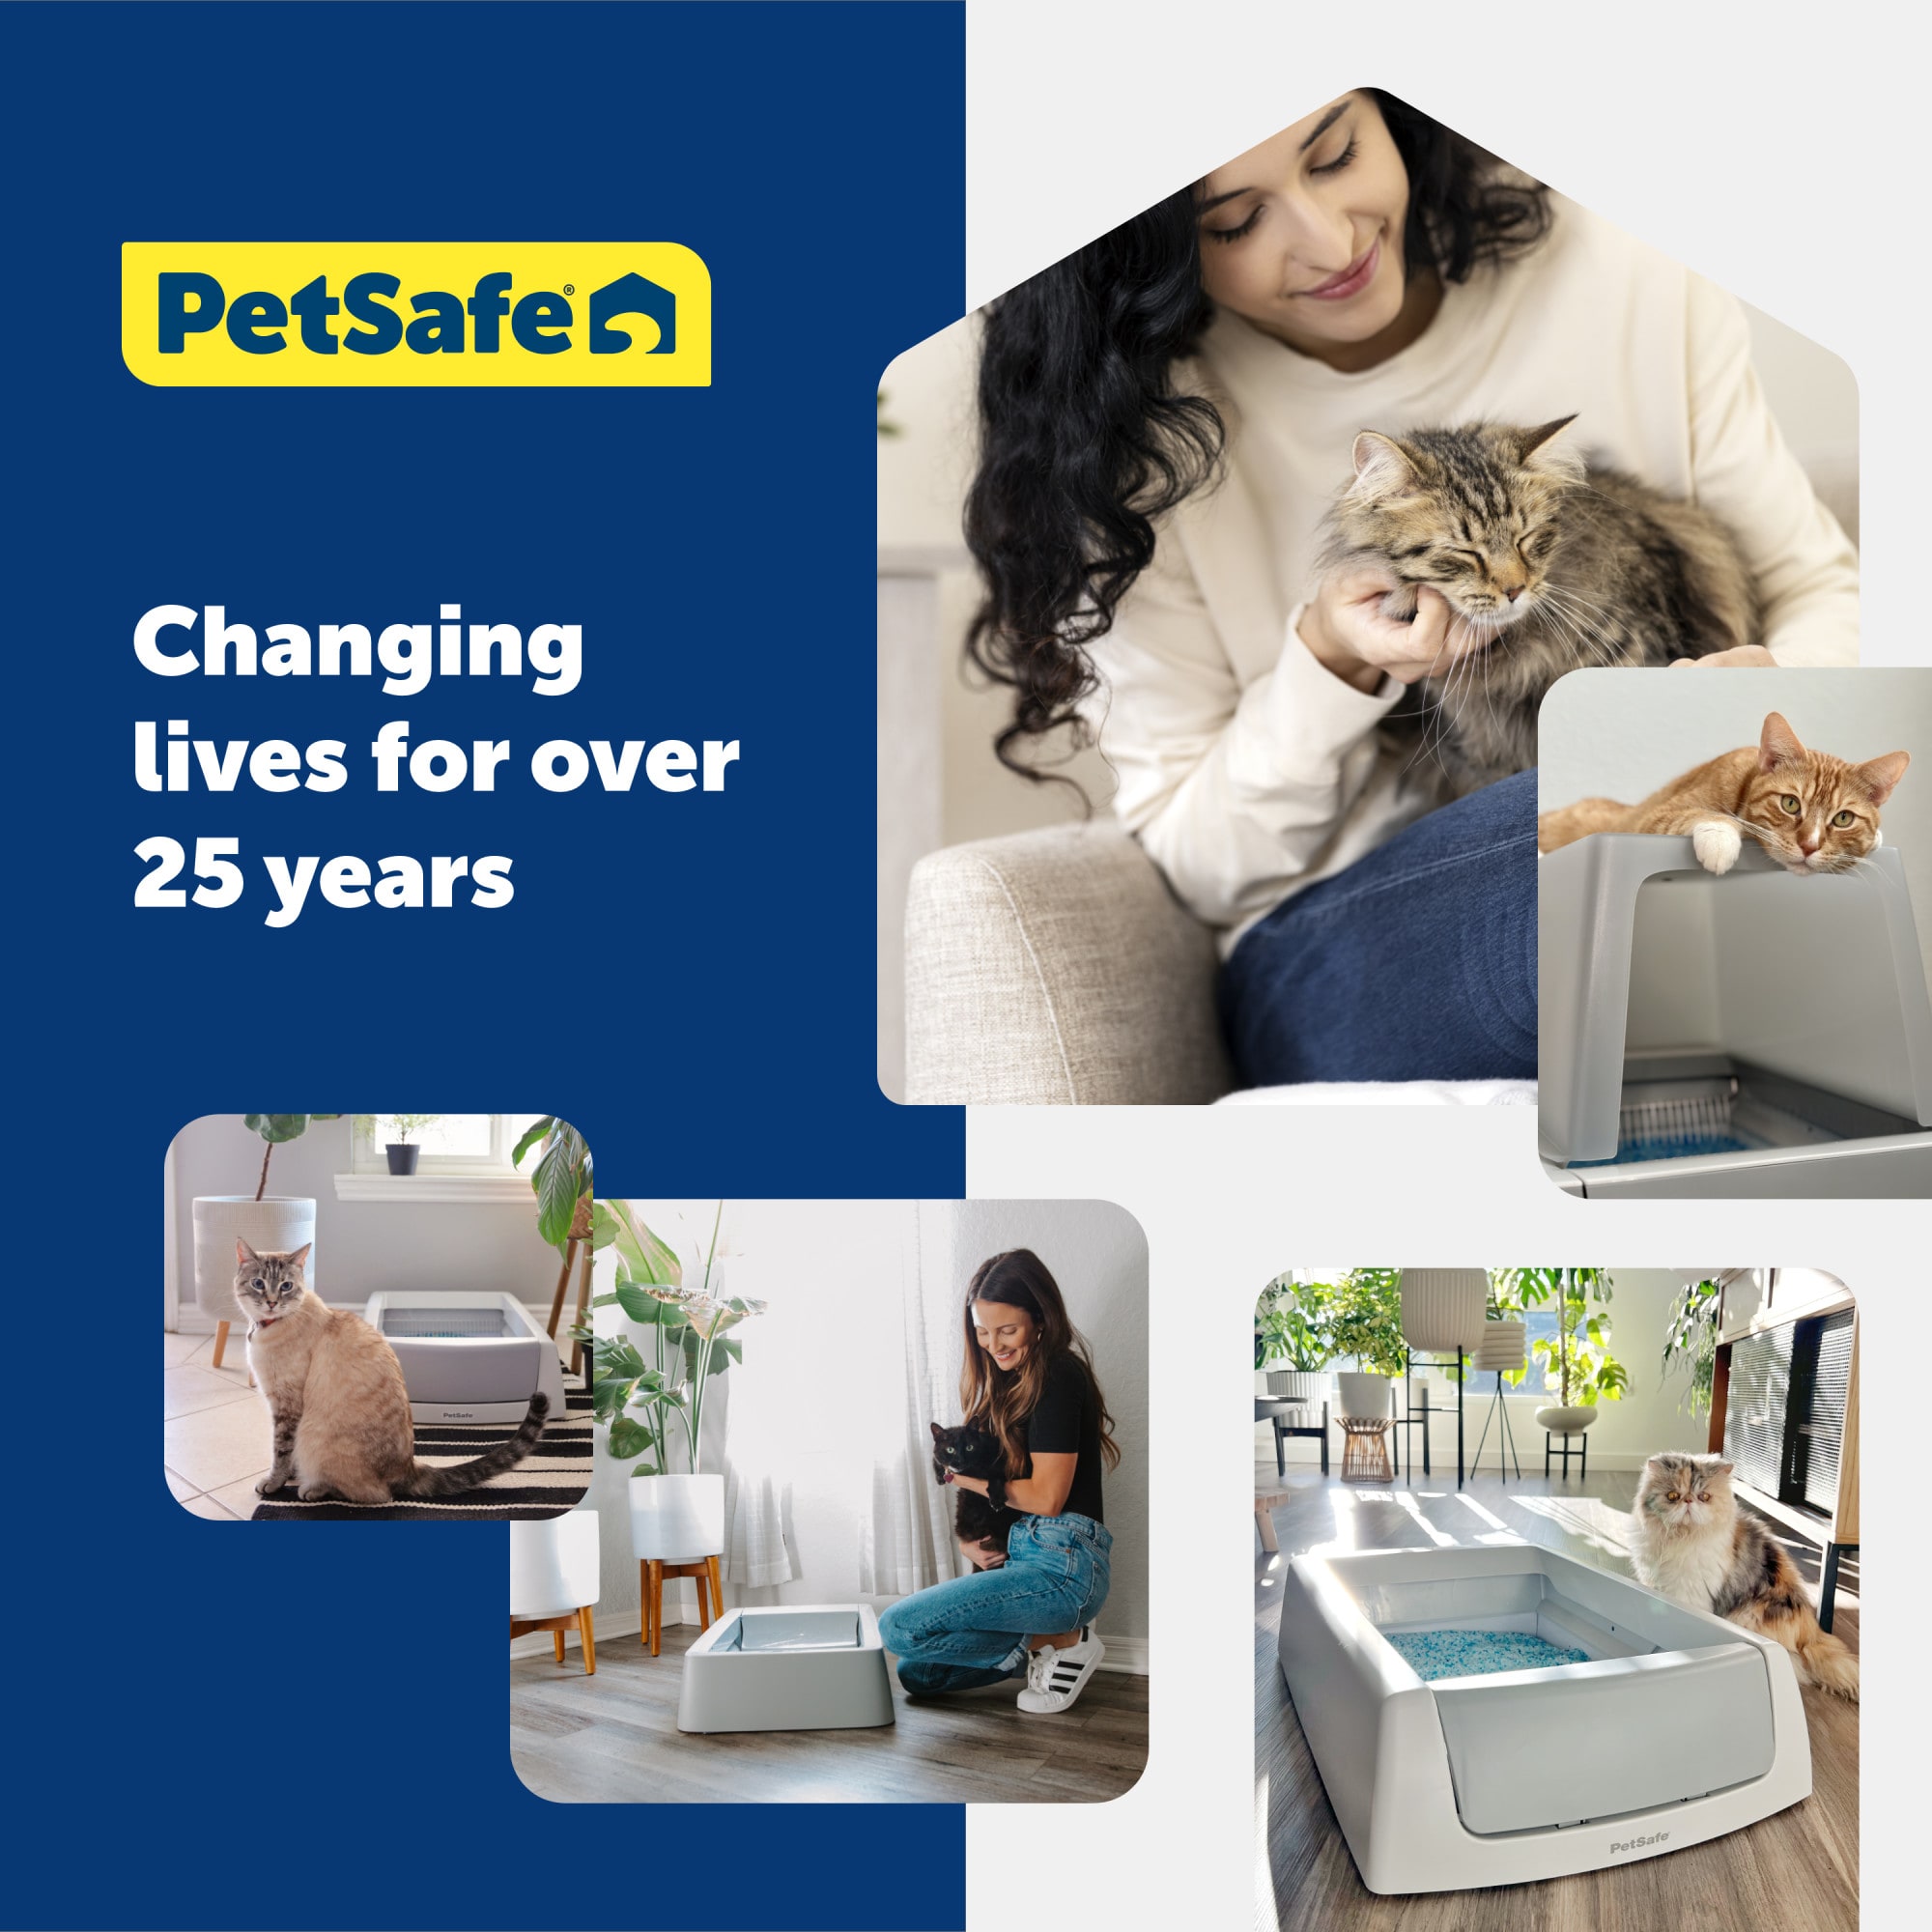 ScoopFree by PetSafe Complete Classic Auto Self-Cleaning Cat Litter Box